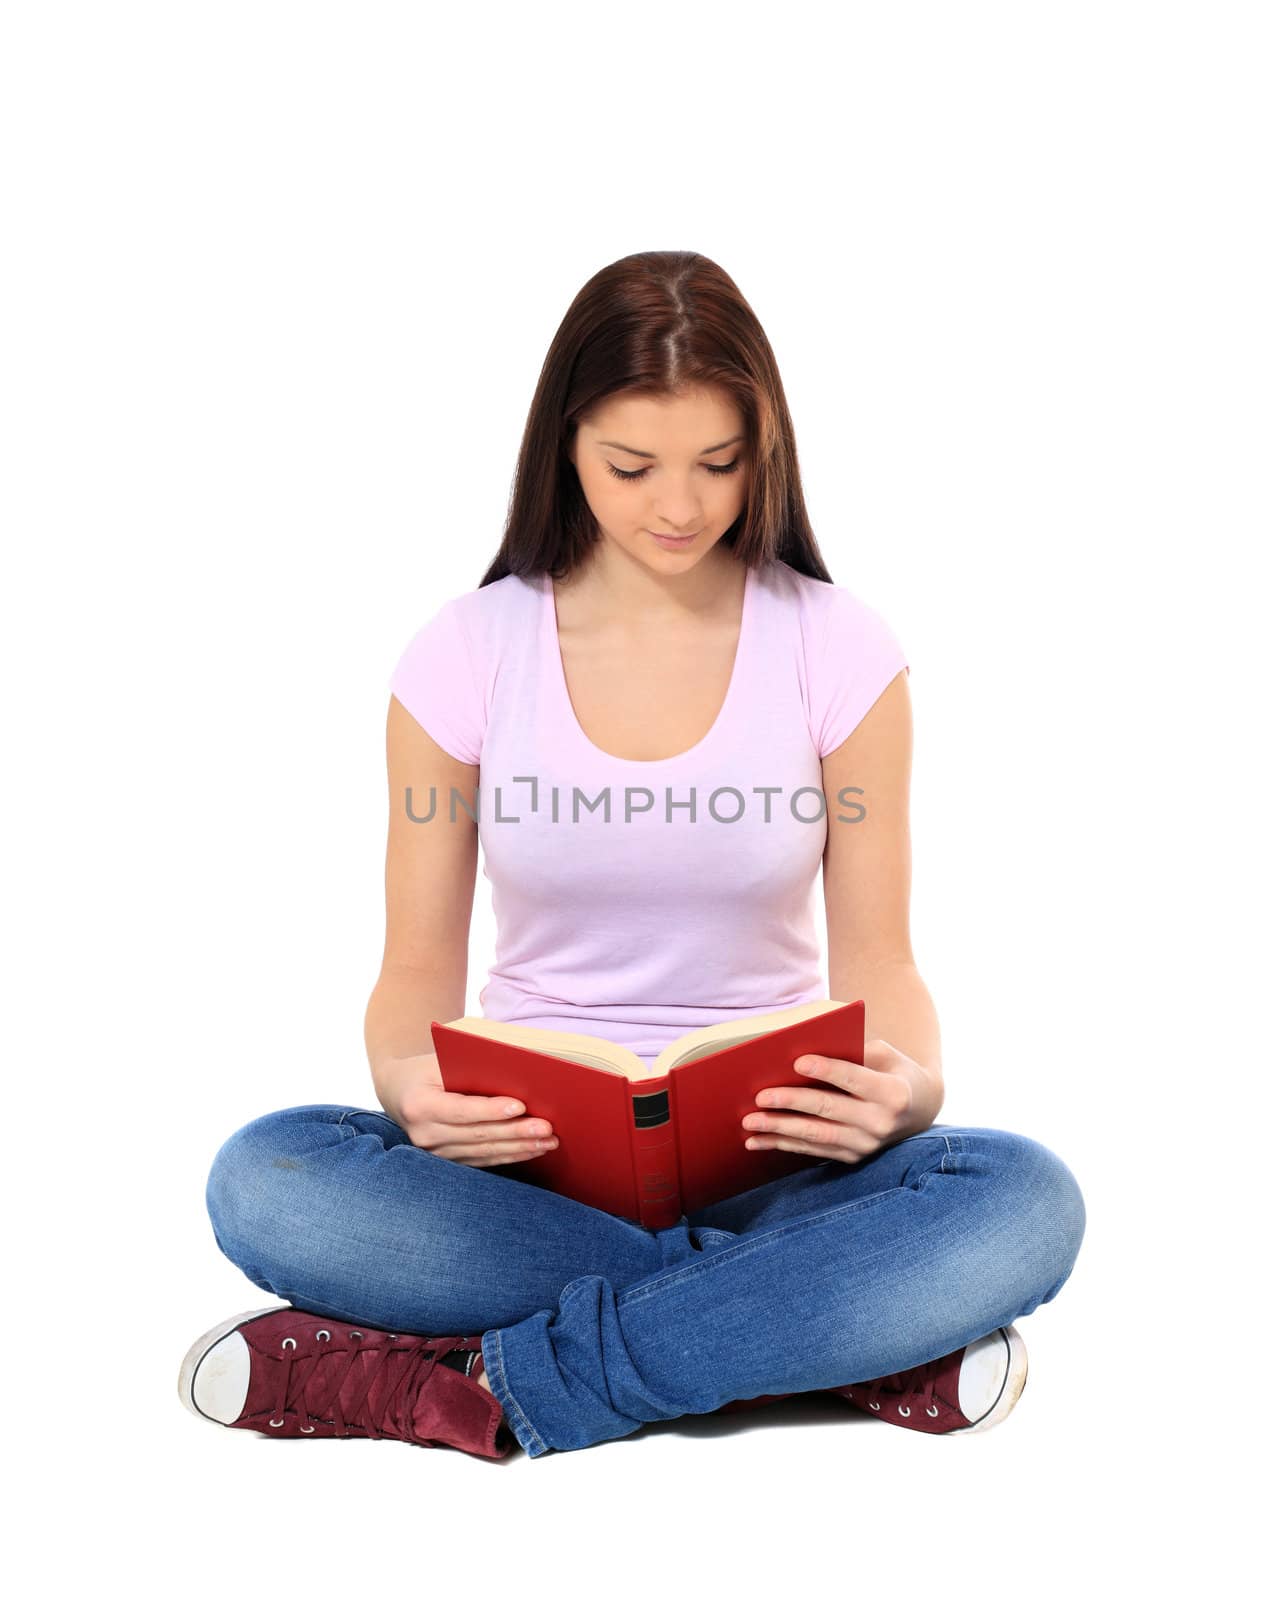 Attractive teenage girl reading a book. All on white background.